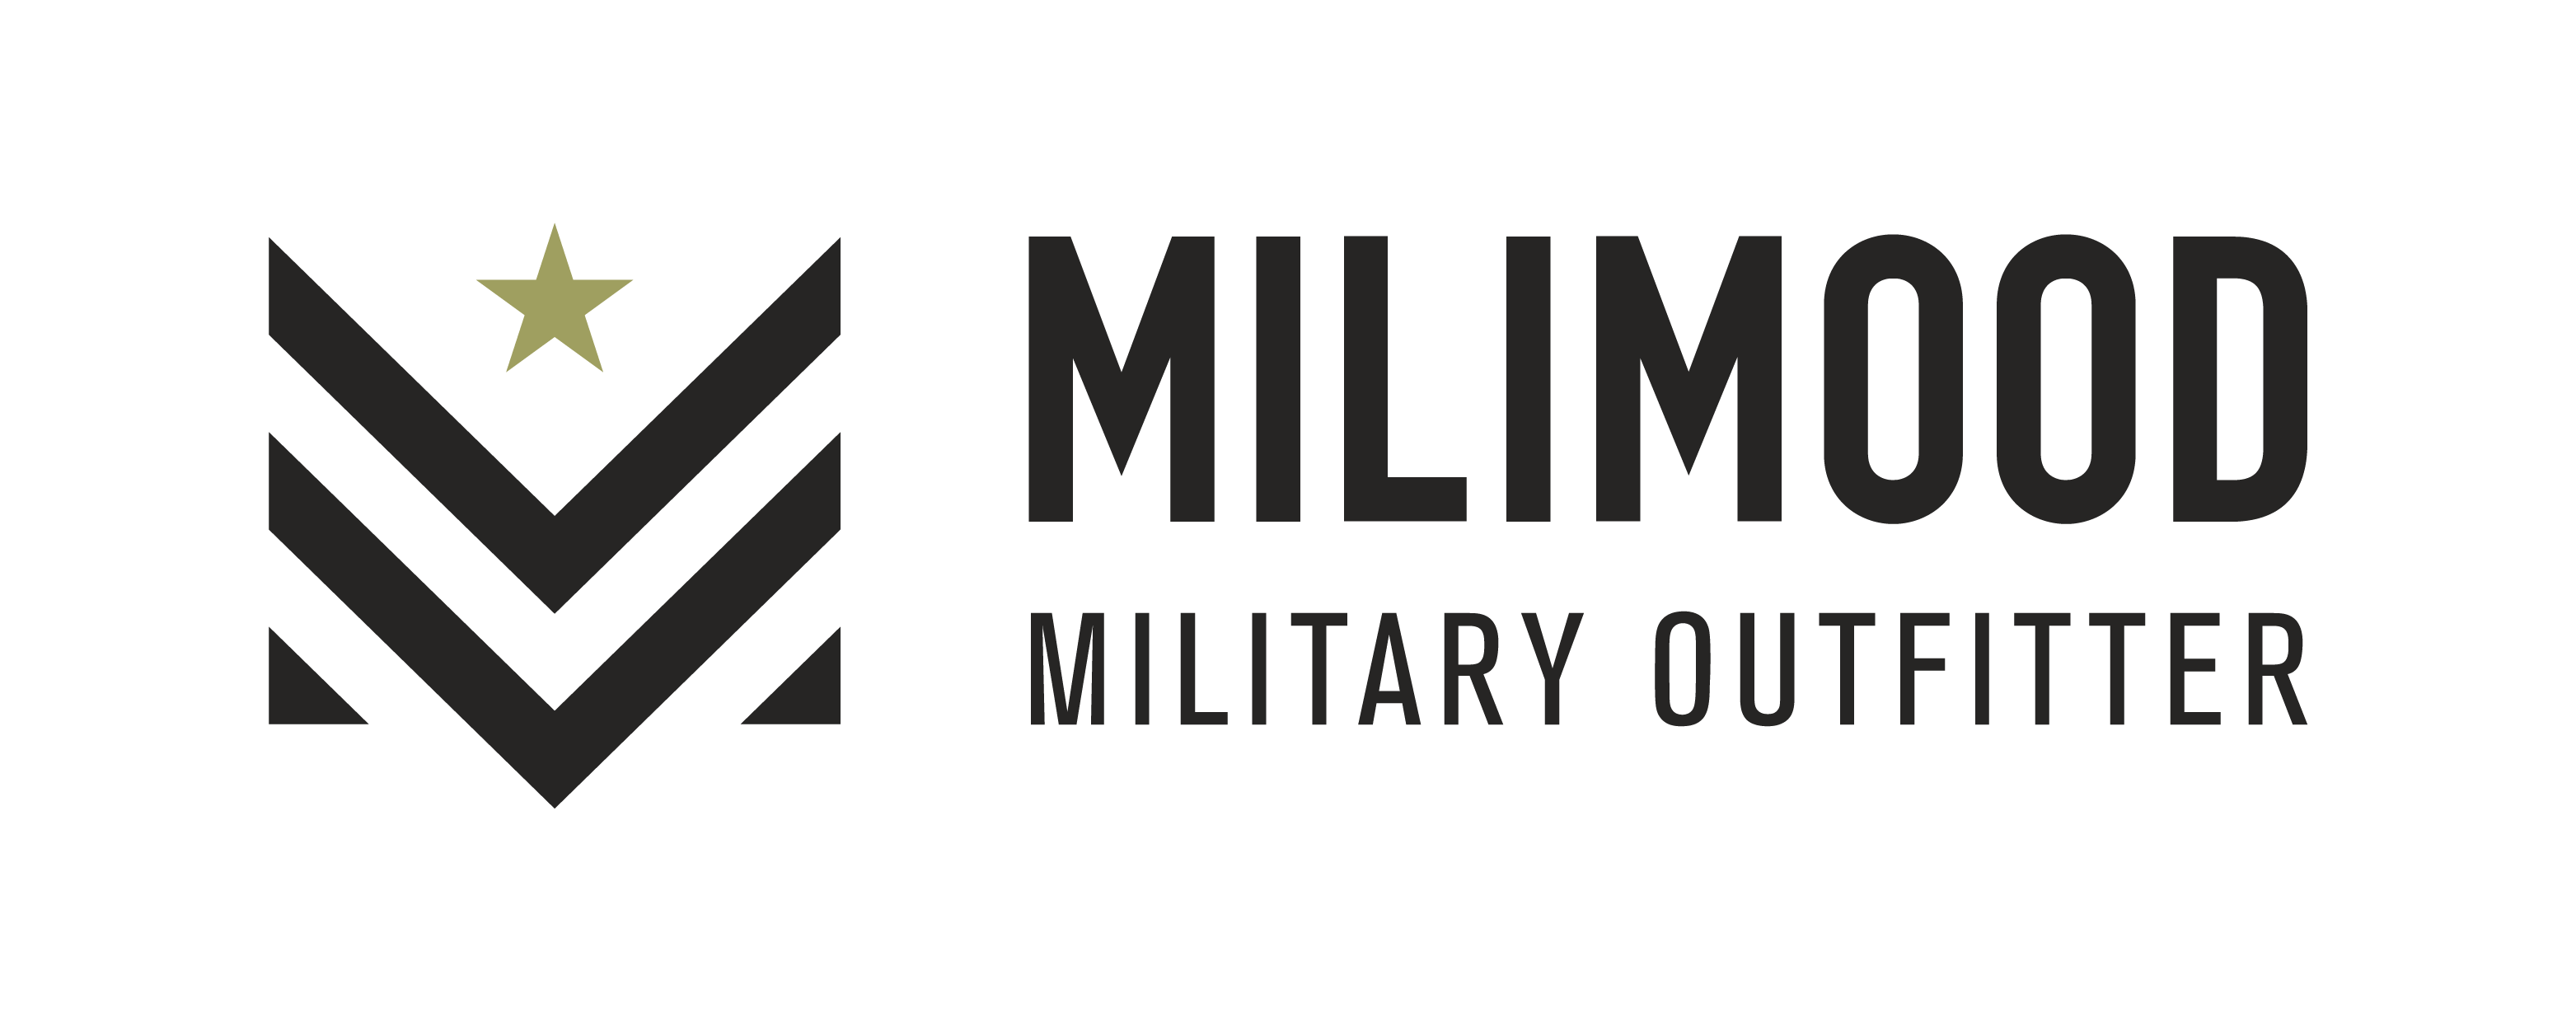 MiliMood Military Outfitter Ropa militar y militaria streetwear